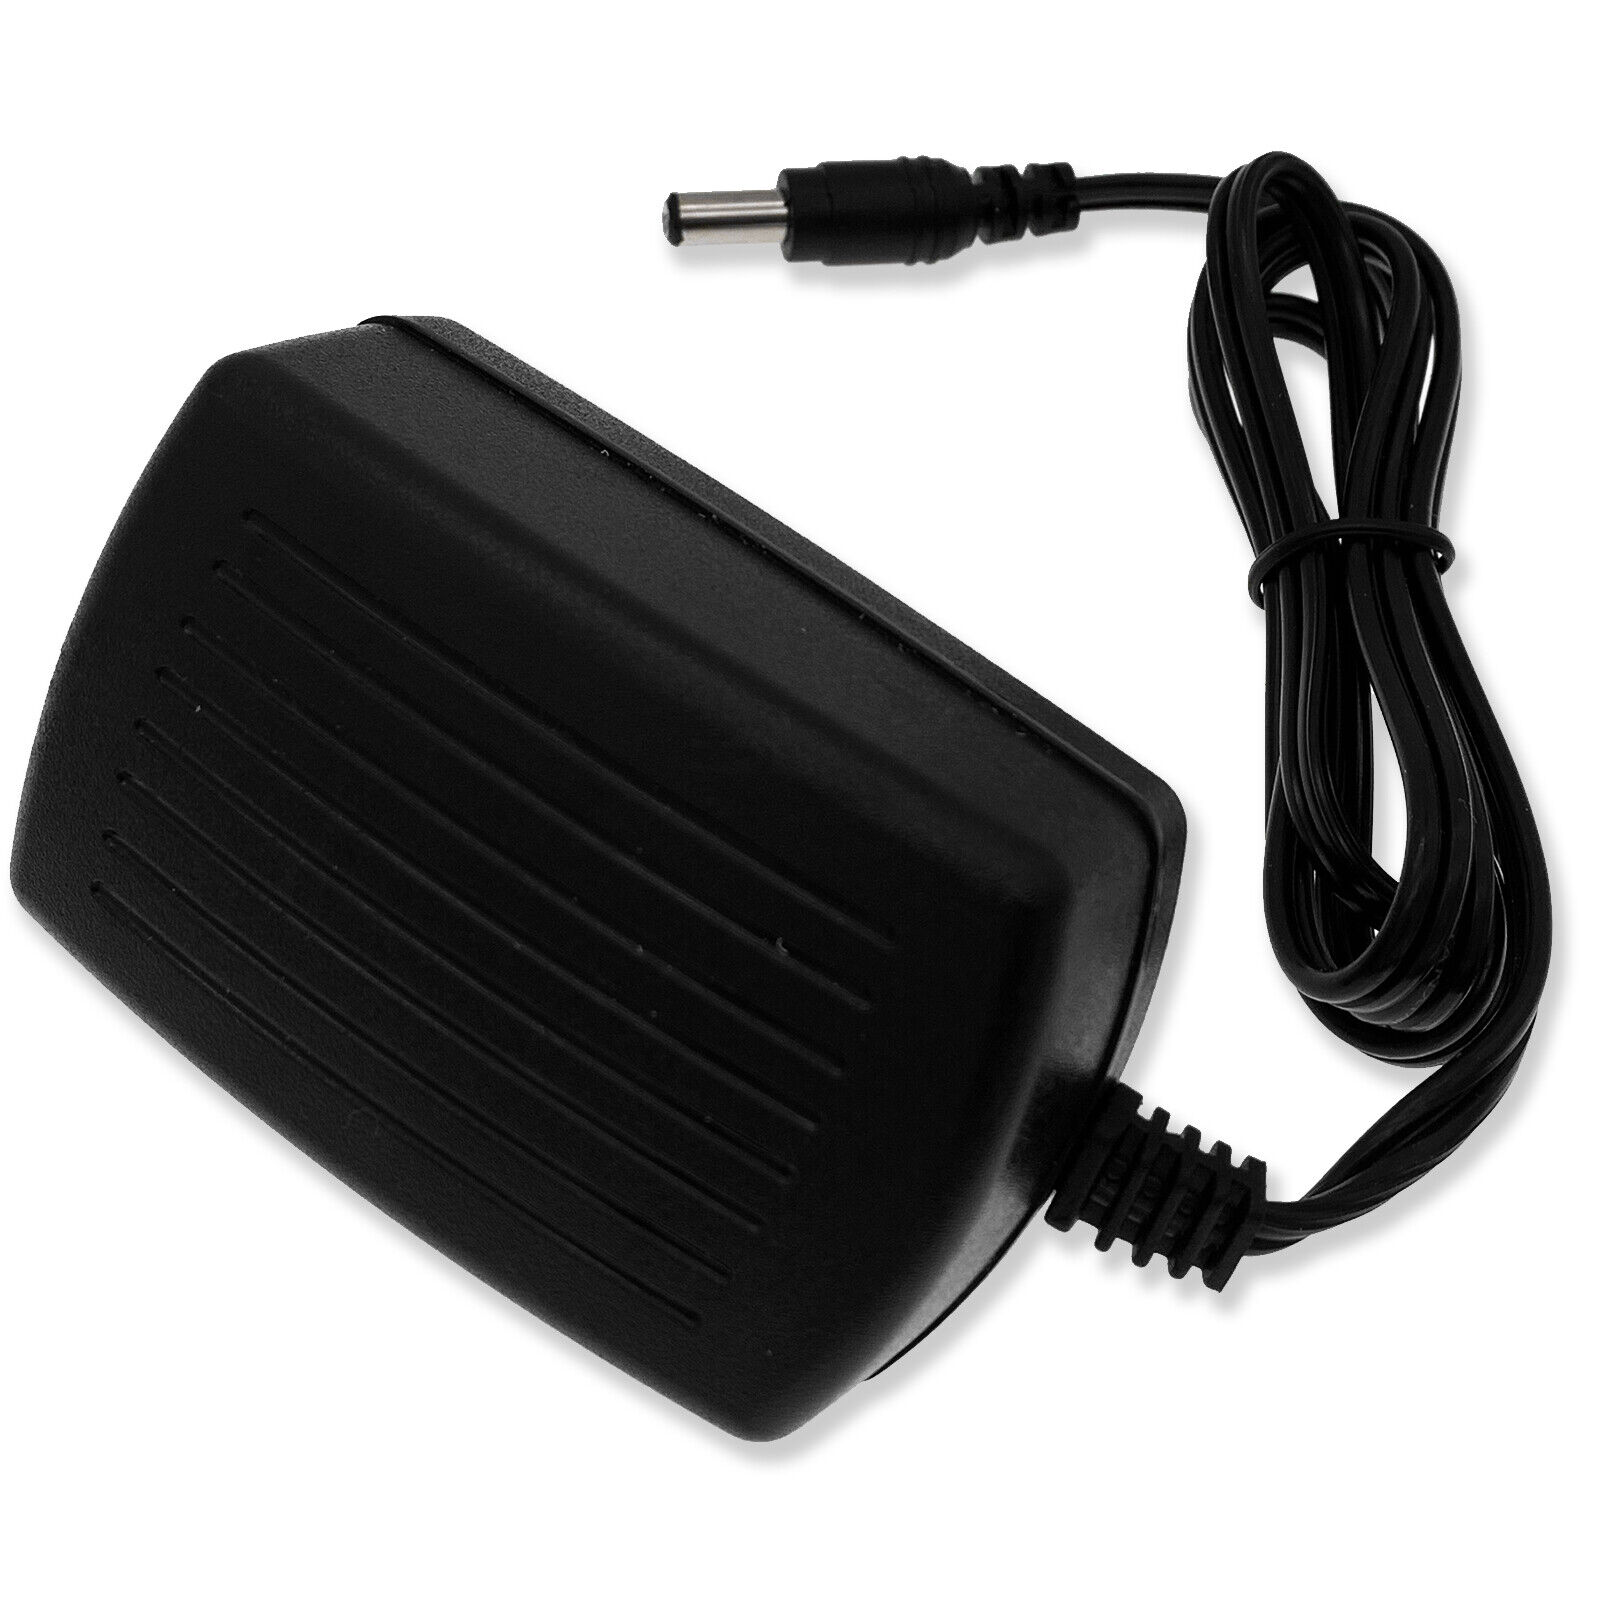 AC Adapter Power Supply for Gold's Gym Power Cycle 290C GGEX616120 GGEX616121 Type AC/DC Adapter MPN Does Not Apply Mod